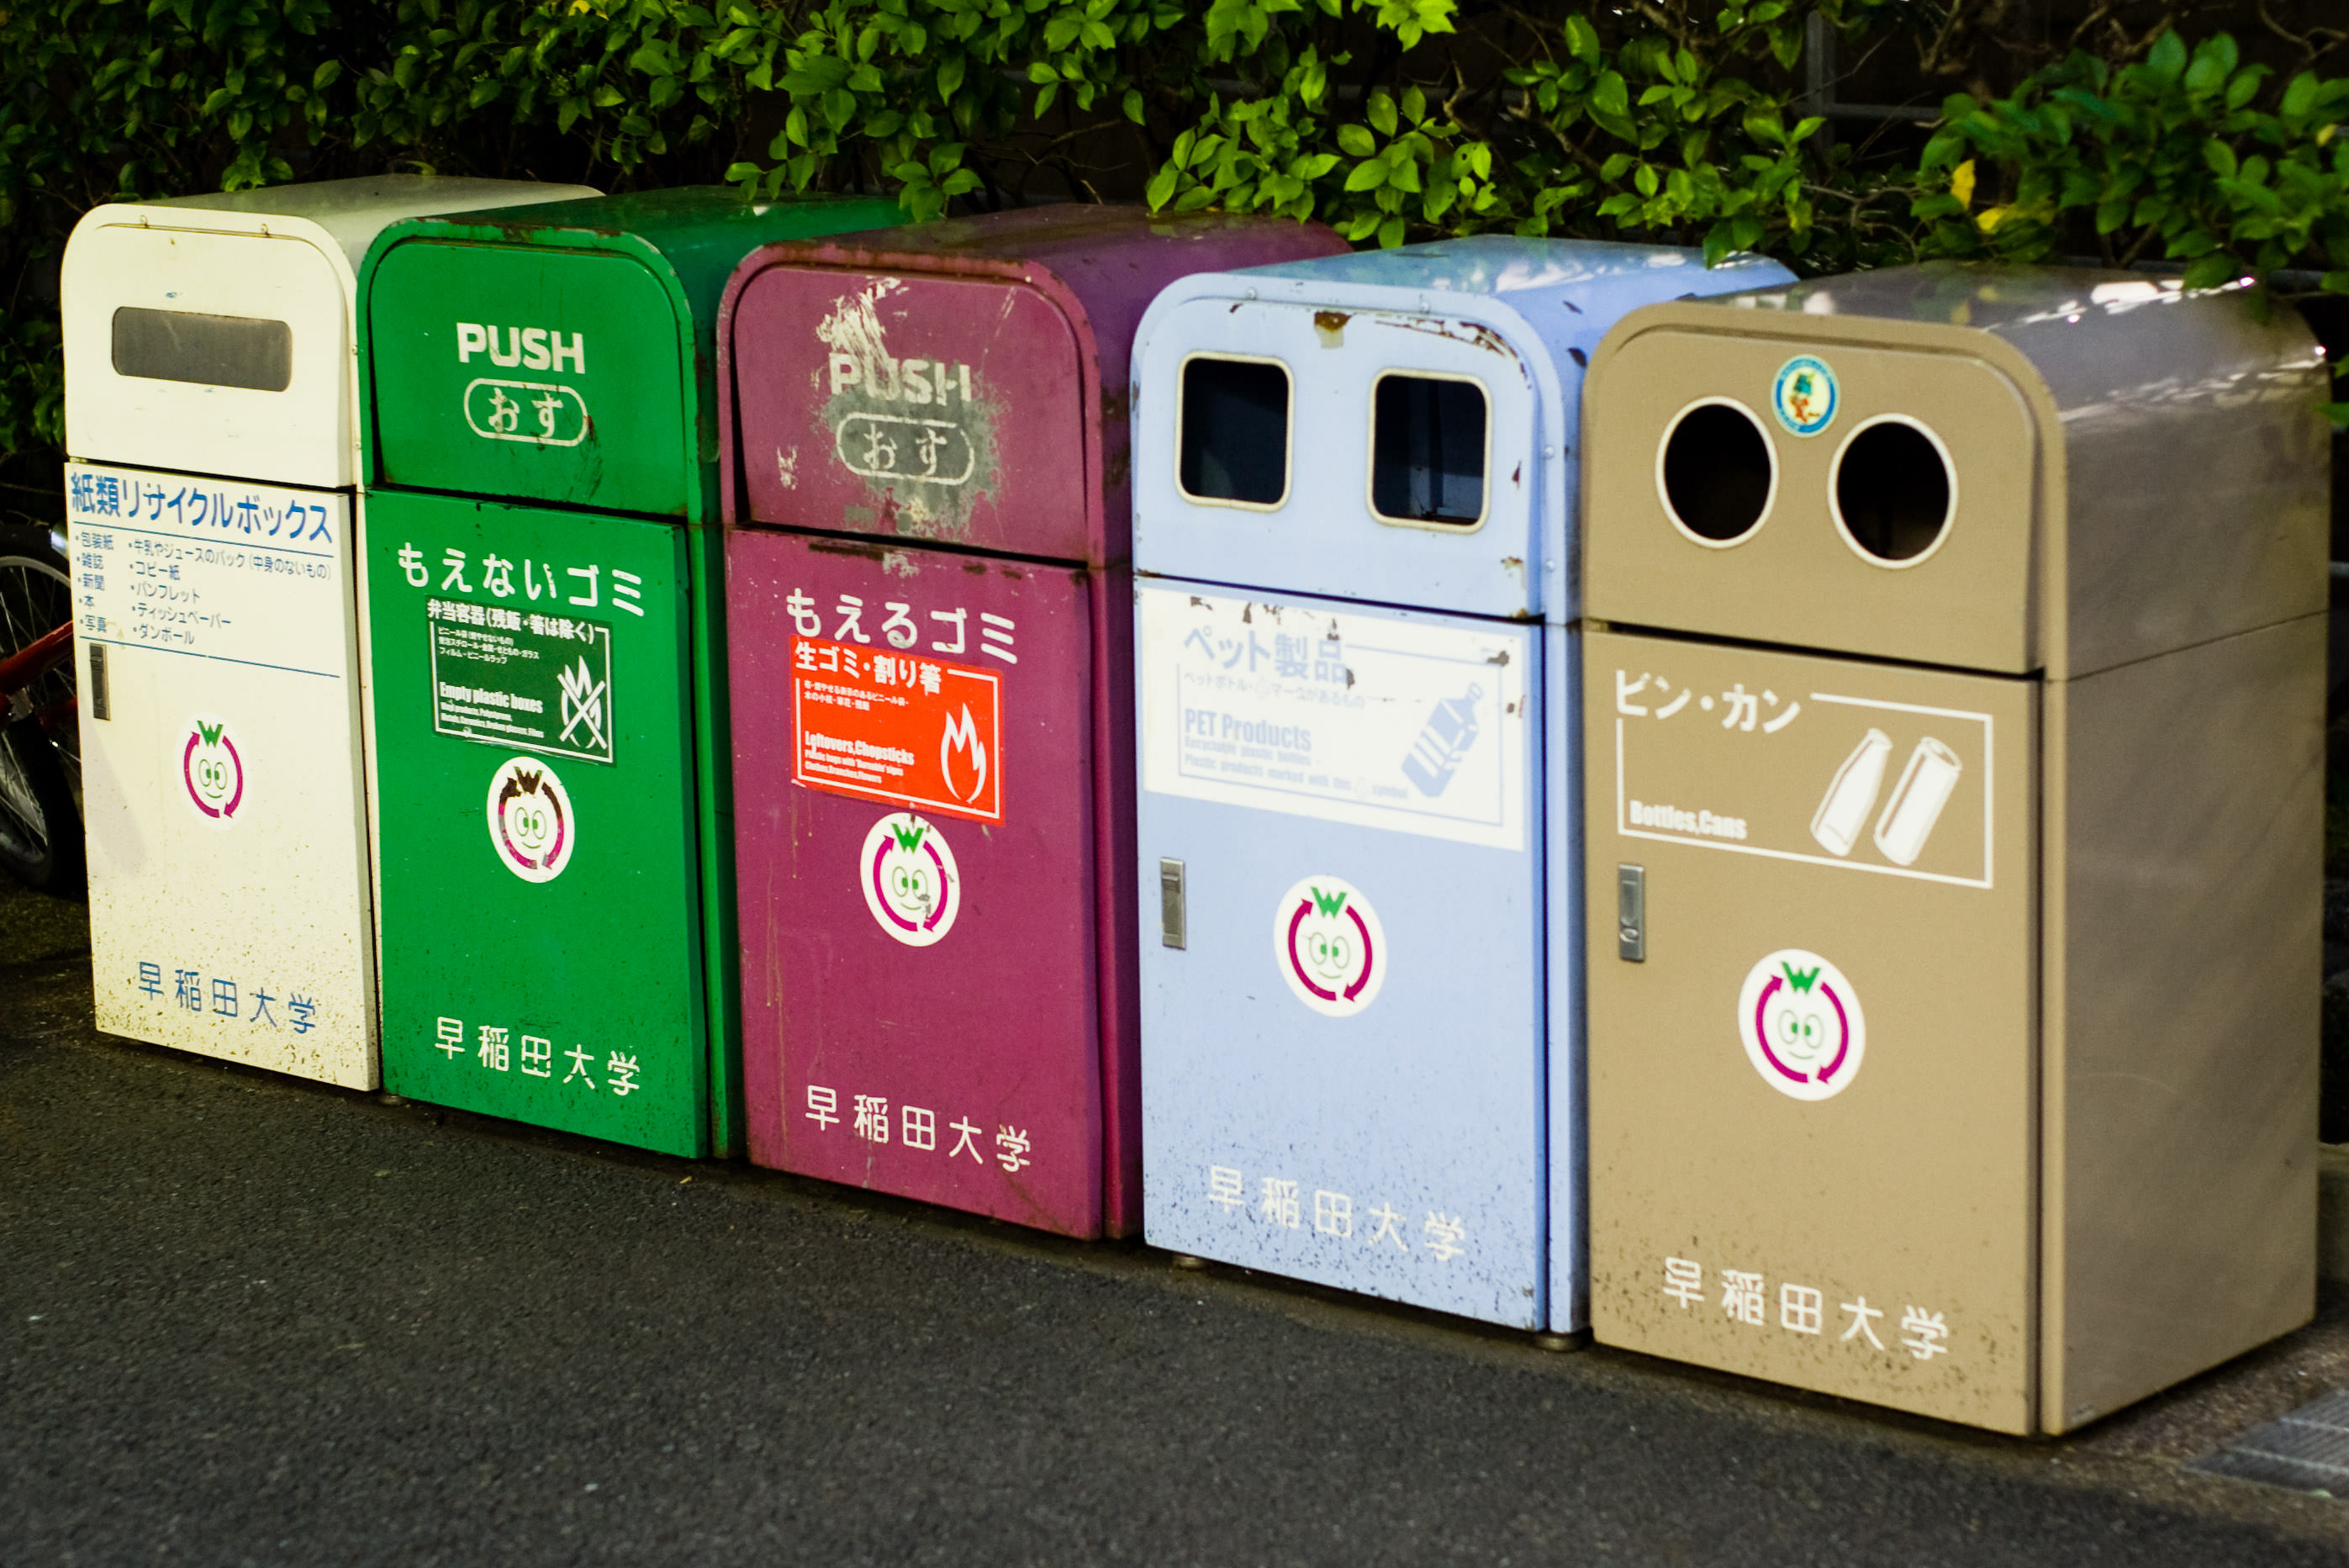 Japan Passes Anti-plastic Law But With No Sanctions For Polluters